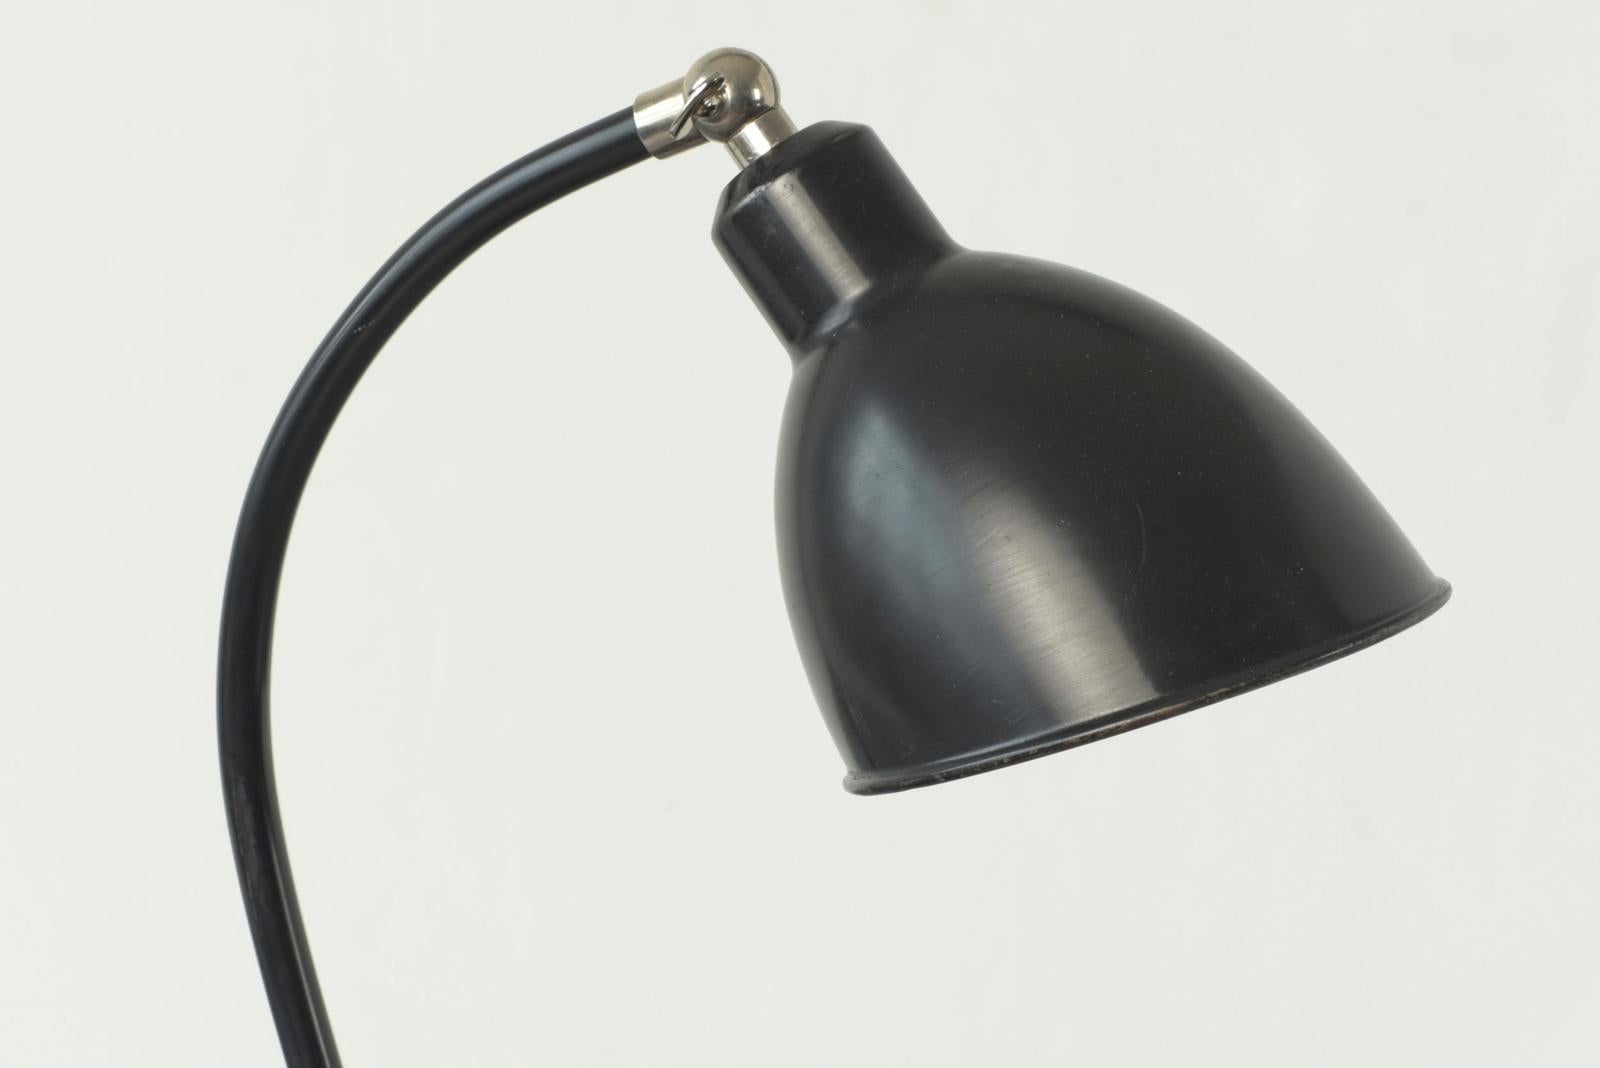 Table Lamp Polo-Populär by Christian Dell for Bünte + Remmler, Germany - 1930 For Sale 4